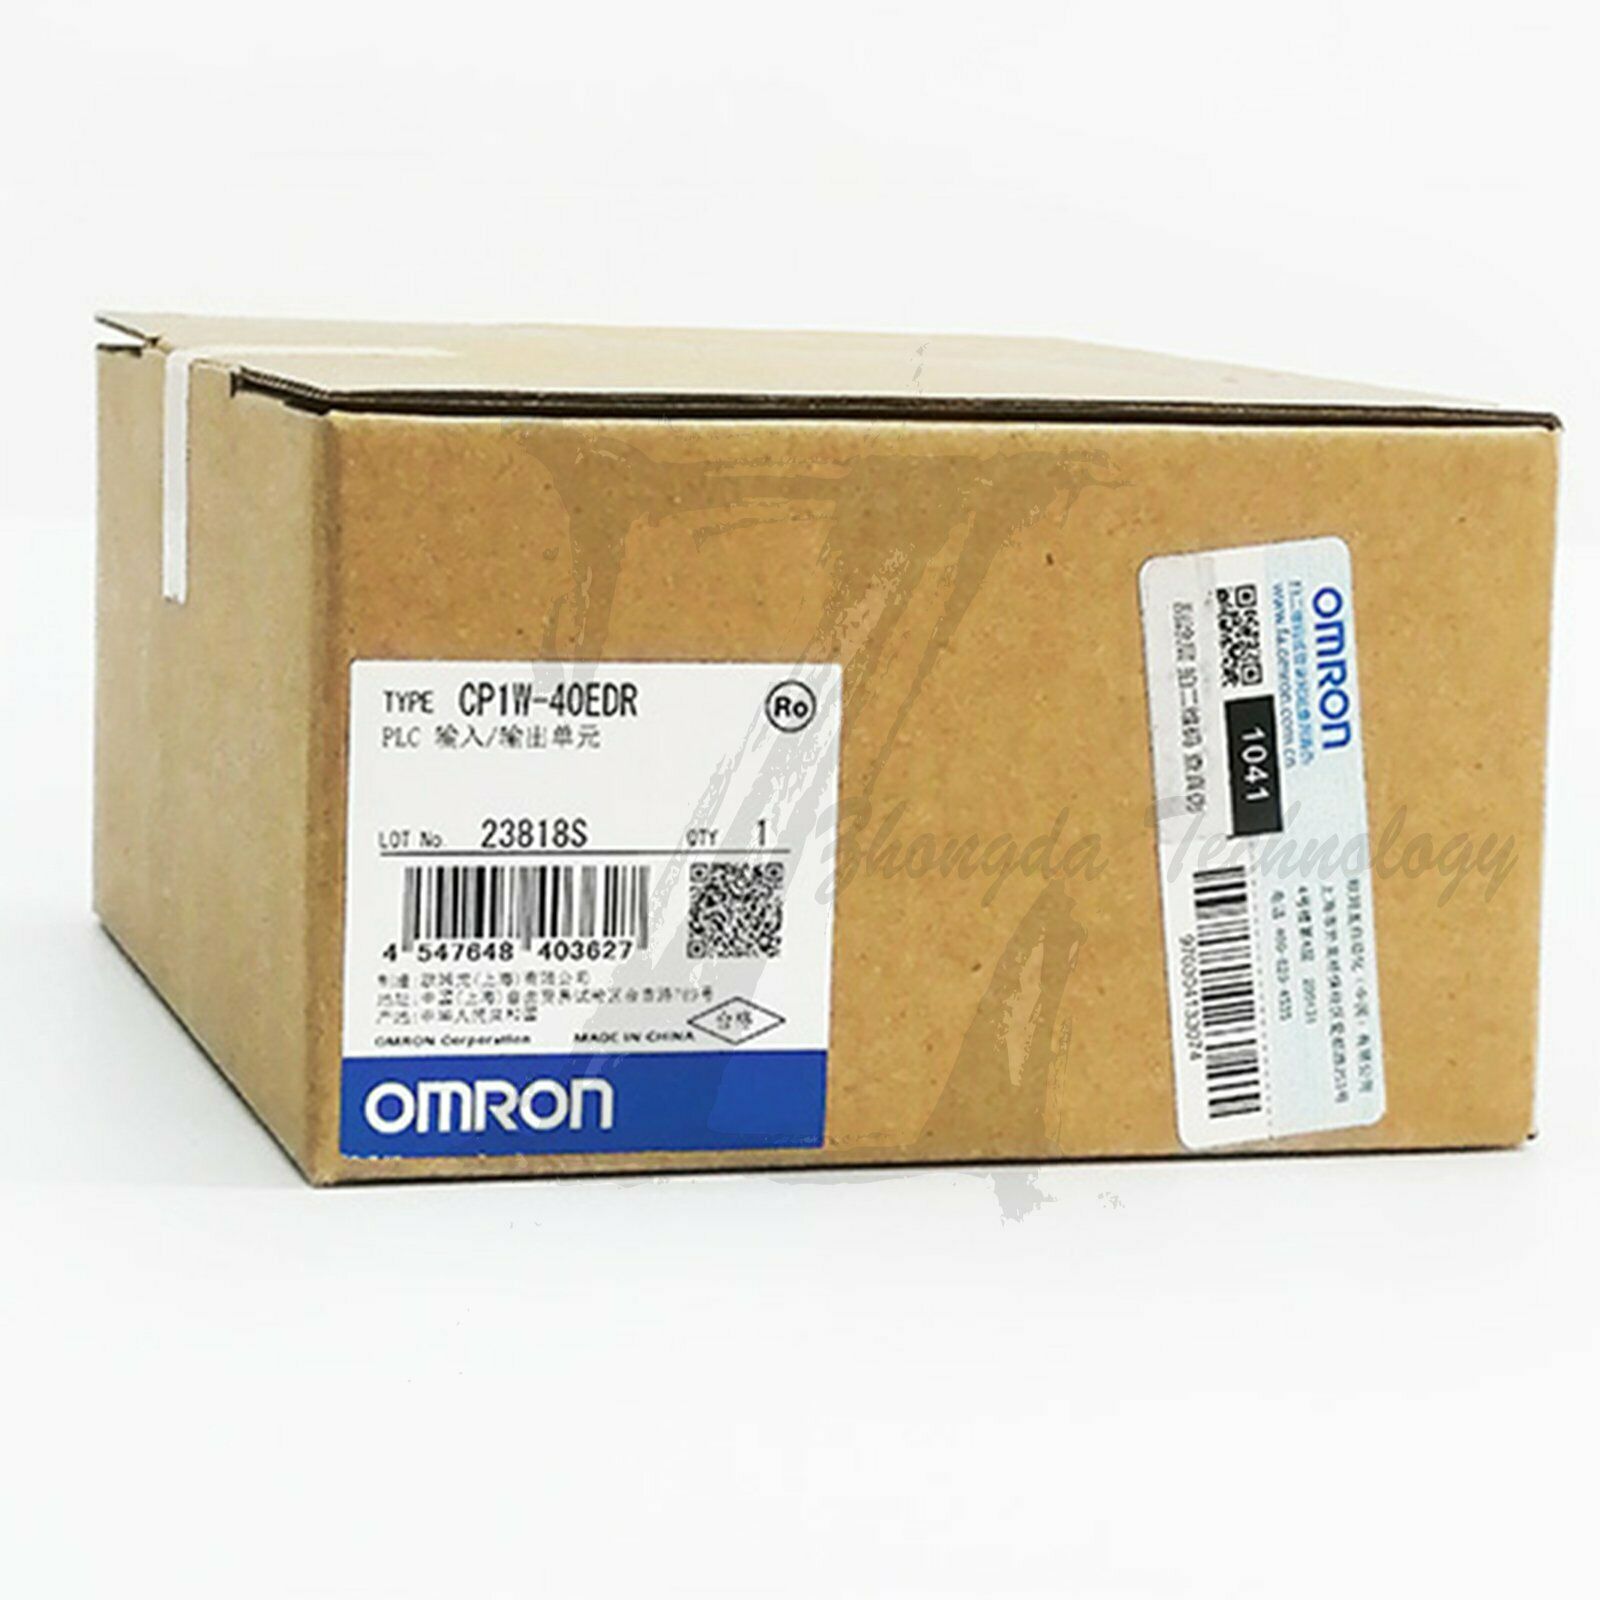 1pcs new in box Omron CP1W-40EDR Expansion module 1 year warranty KOEED 201-500, 80%, import_2020_10_10_031751, Omron, Other